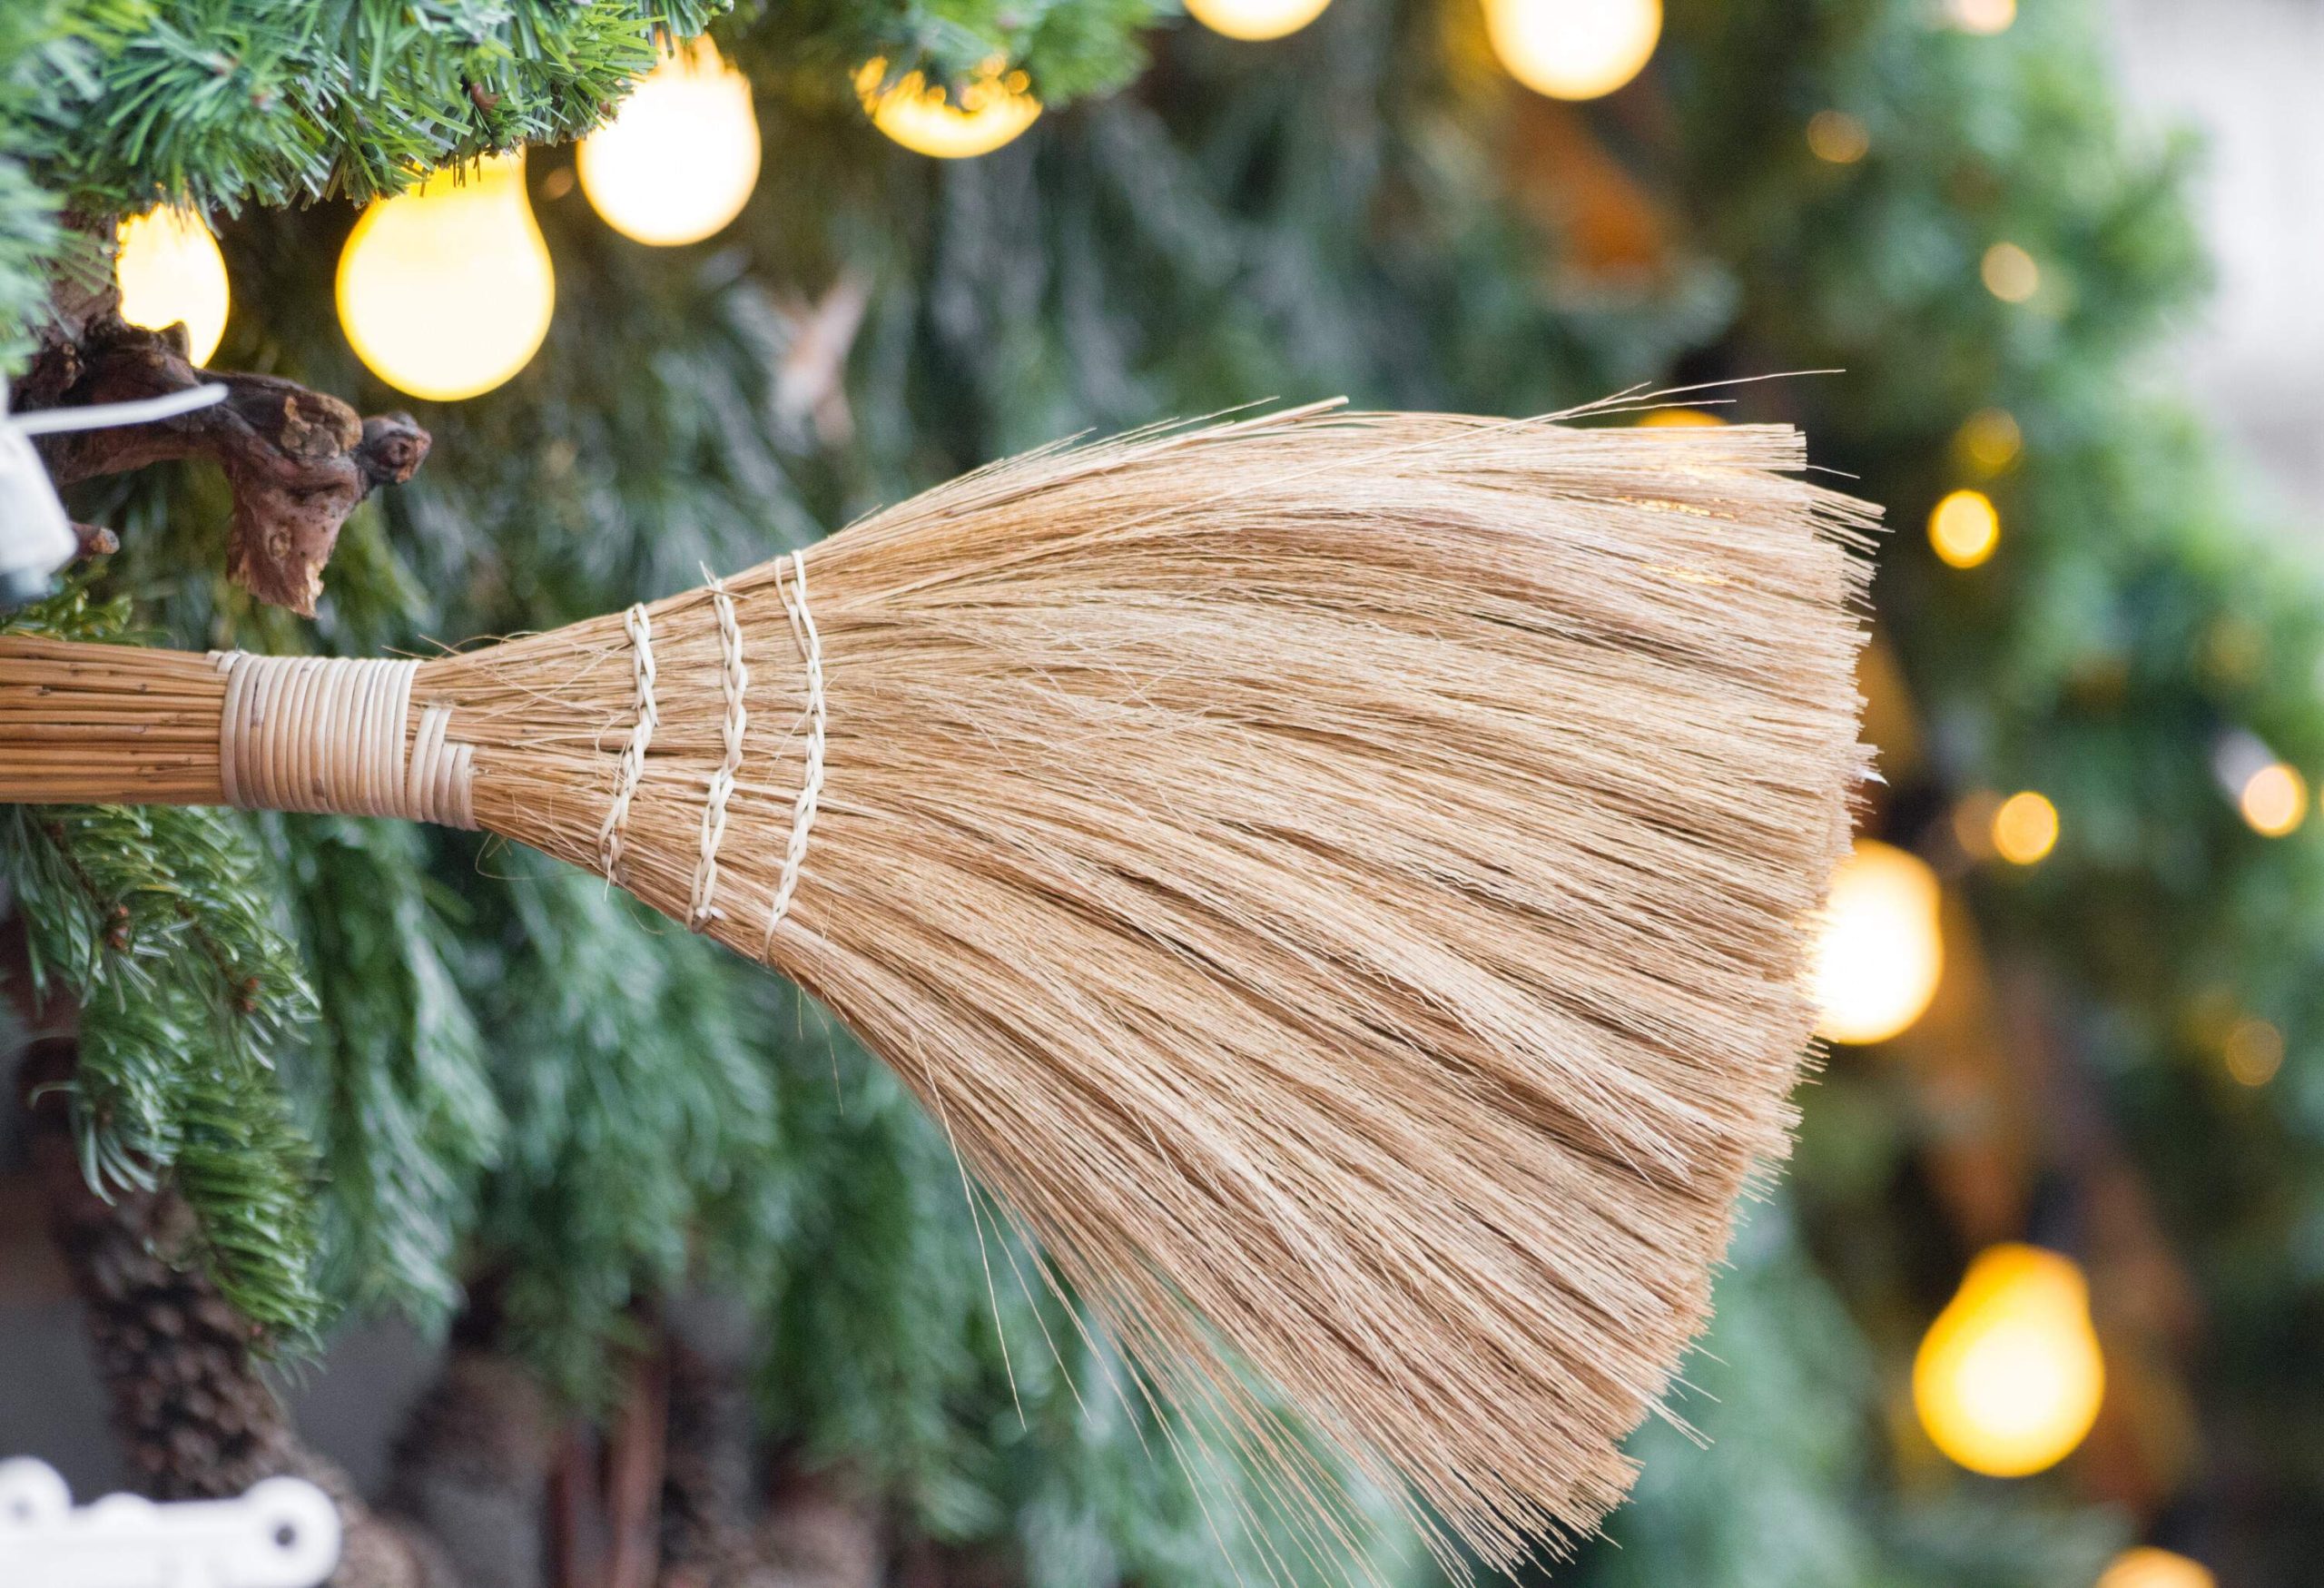 A broomstick sticking out from a background of pine needles and string lights.